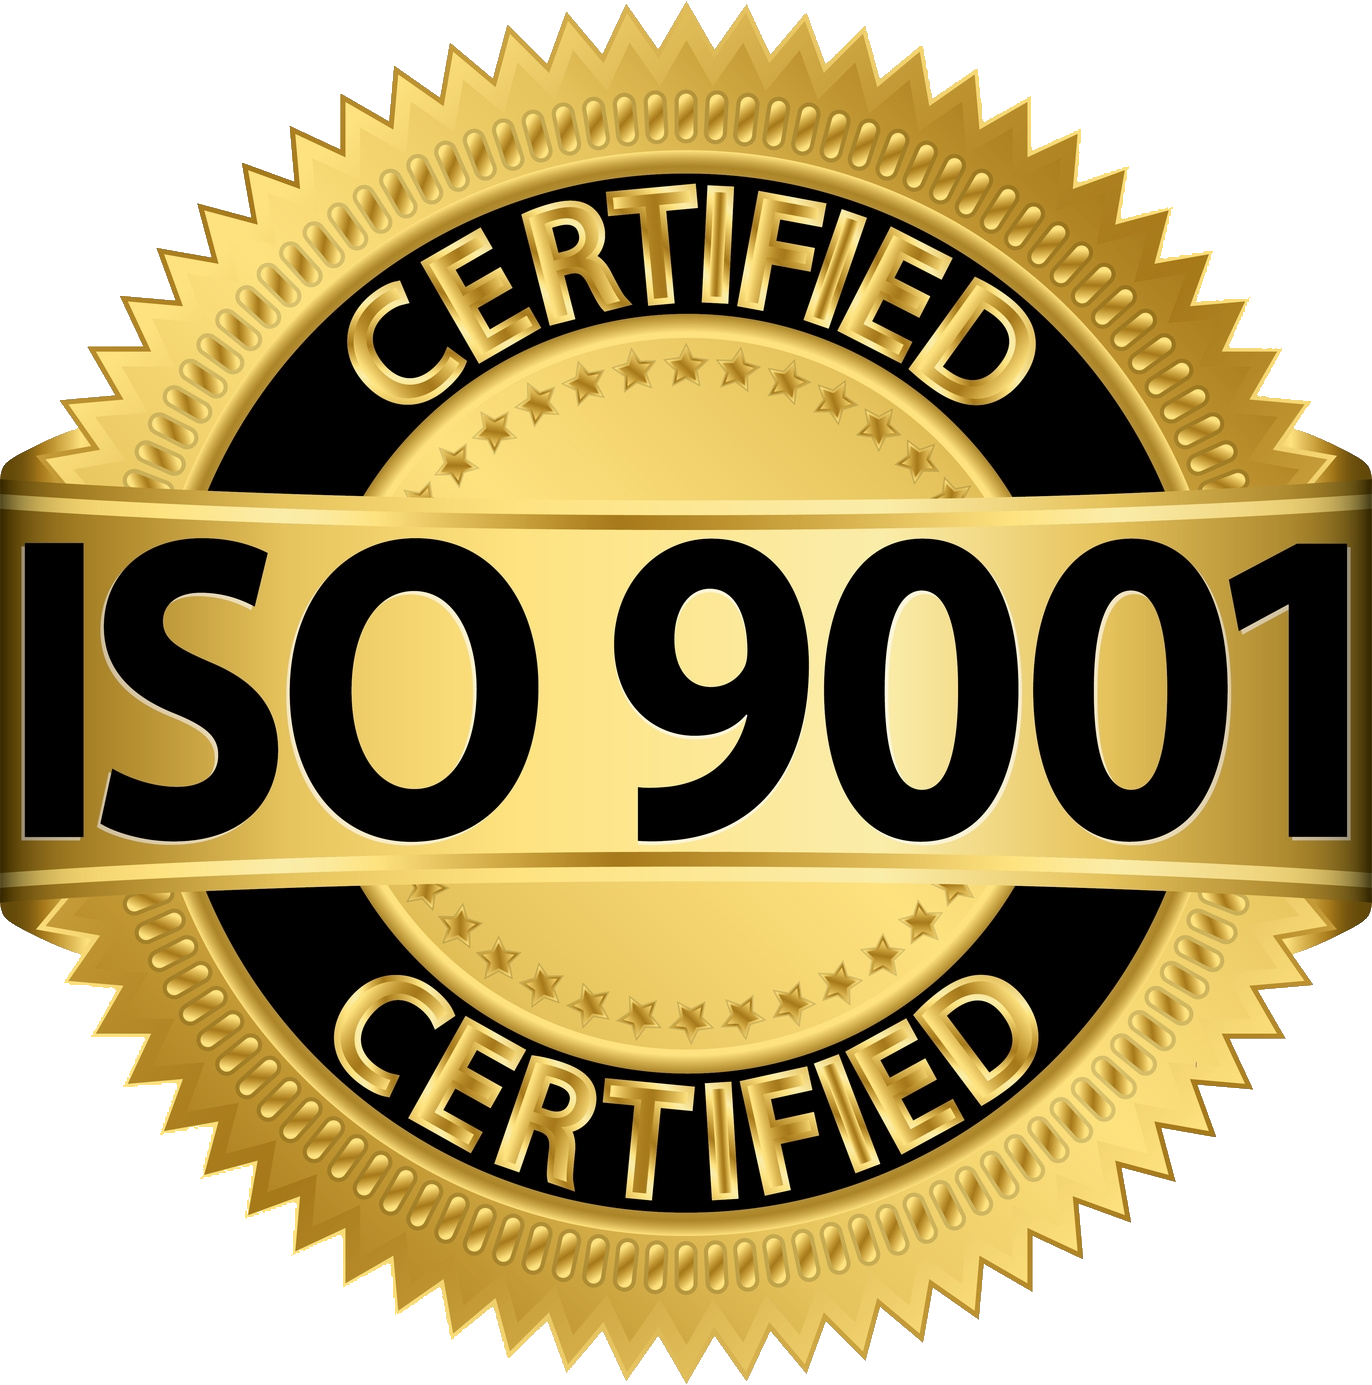 We Are Certified With ISO 9001